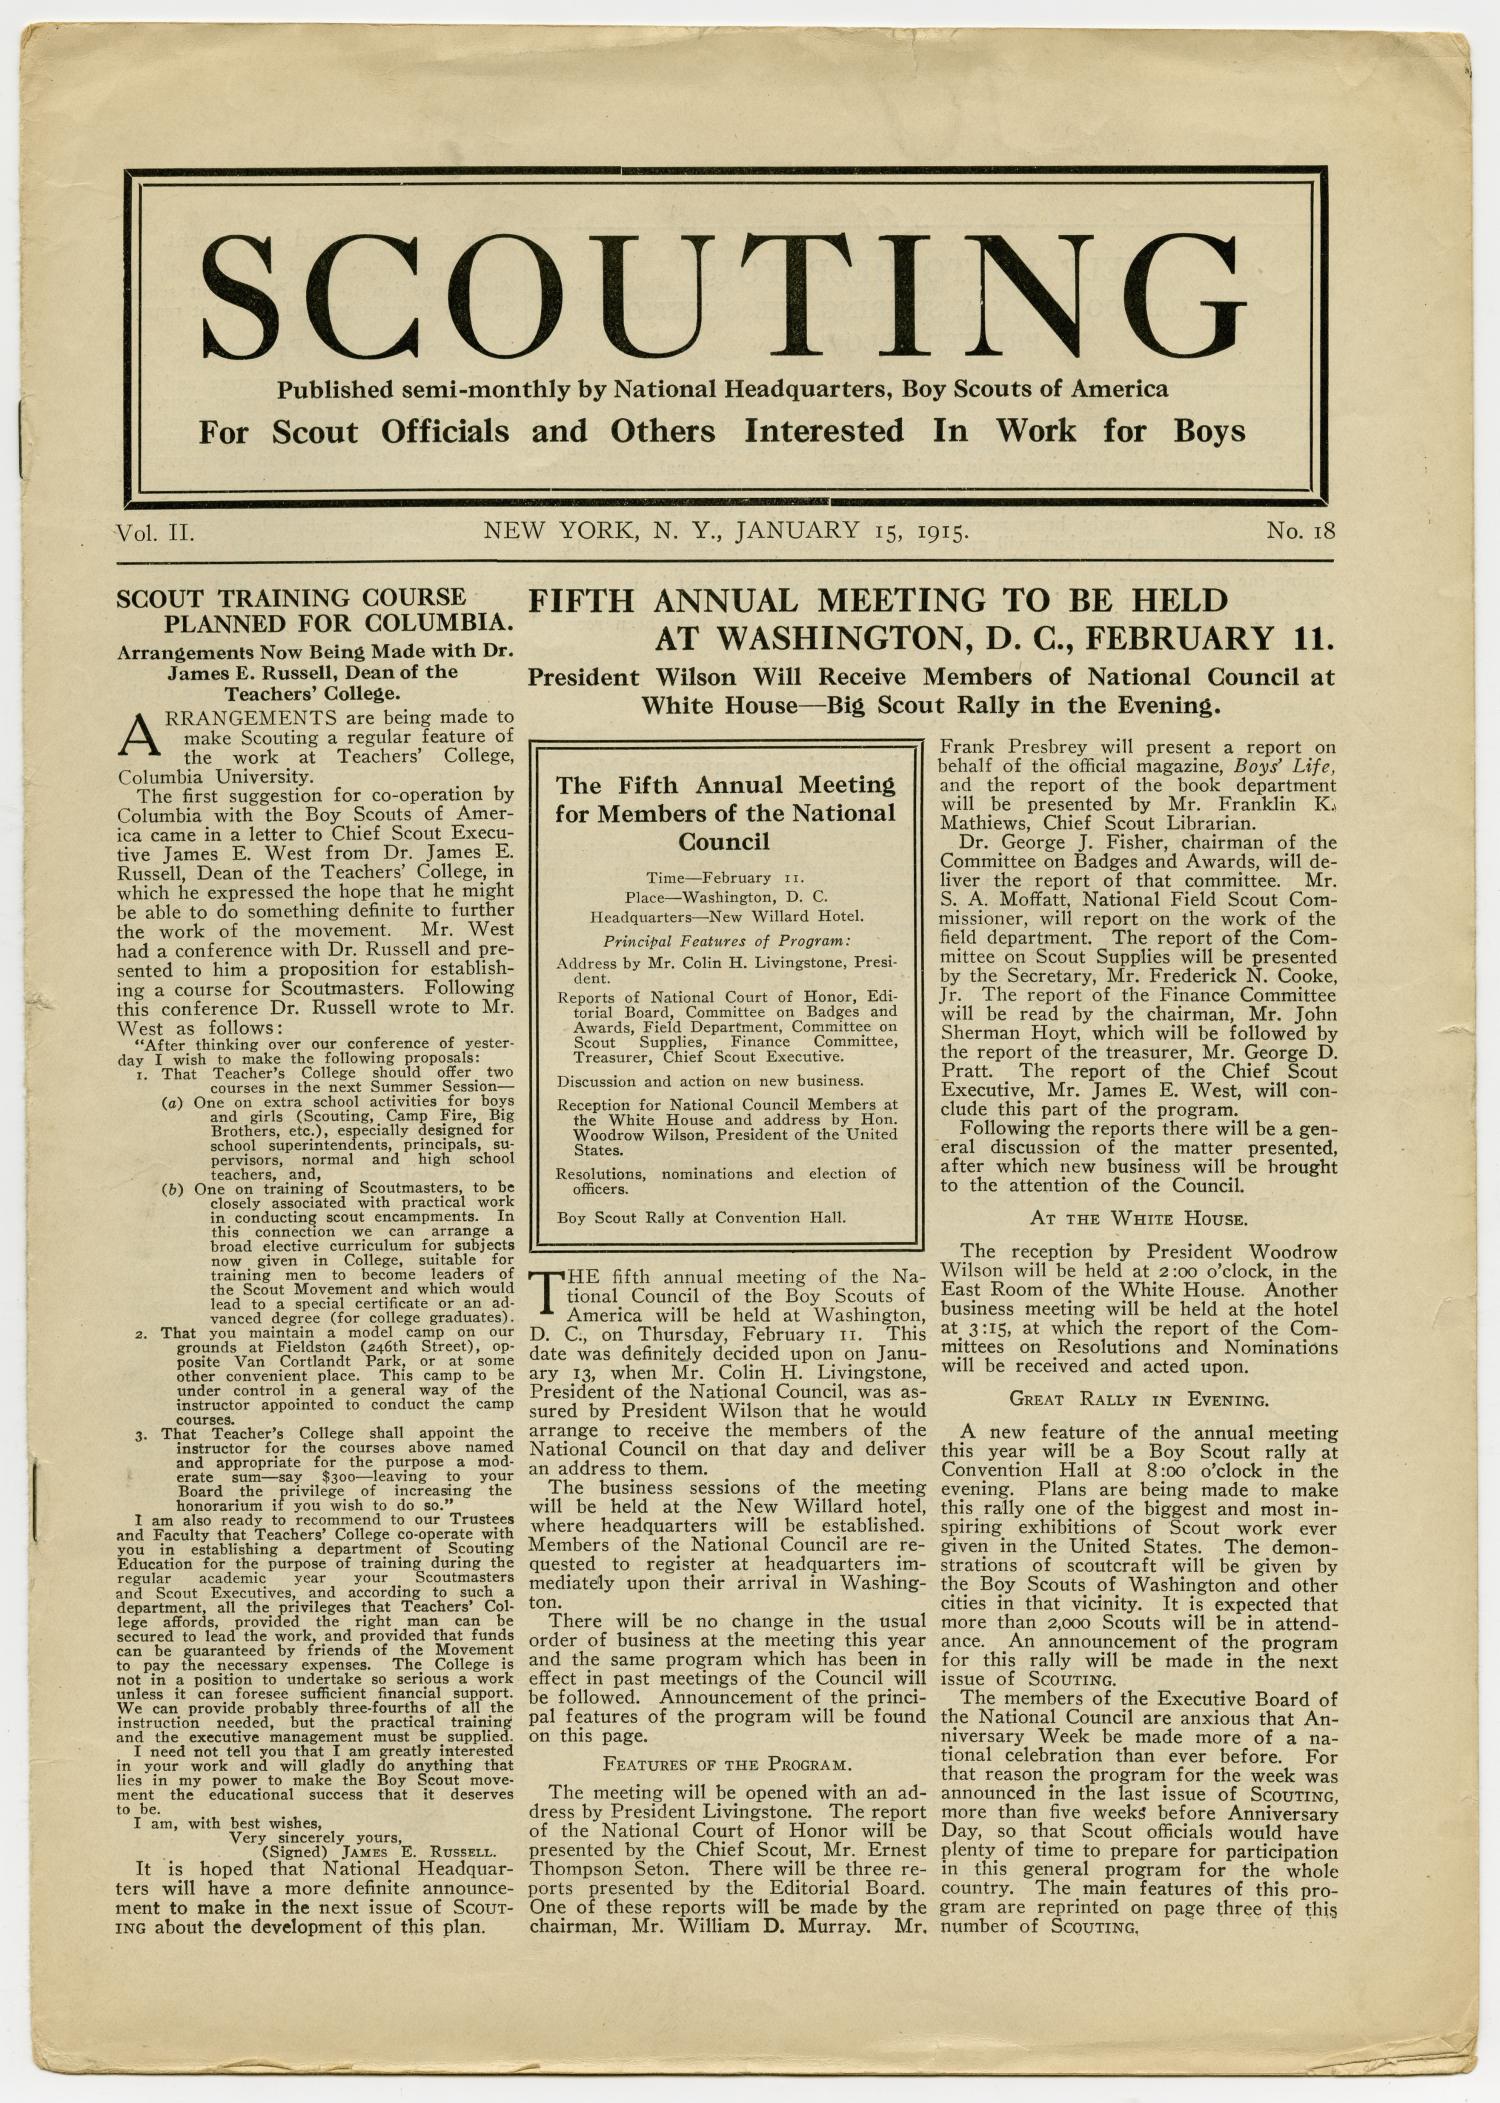 Scouting, Volume 2, Number 18, January 15, 1915
                                                
                                                    1
                                                